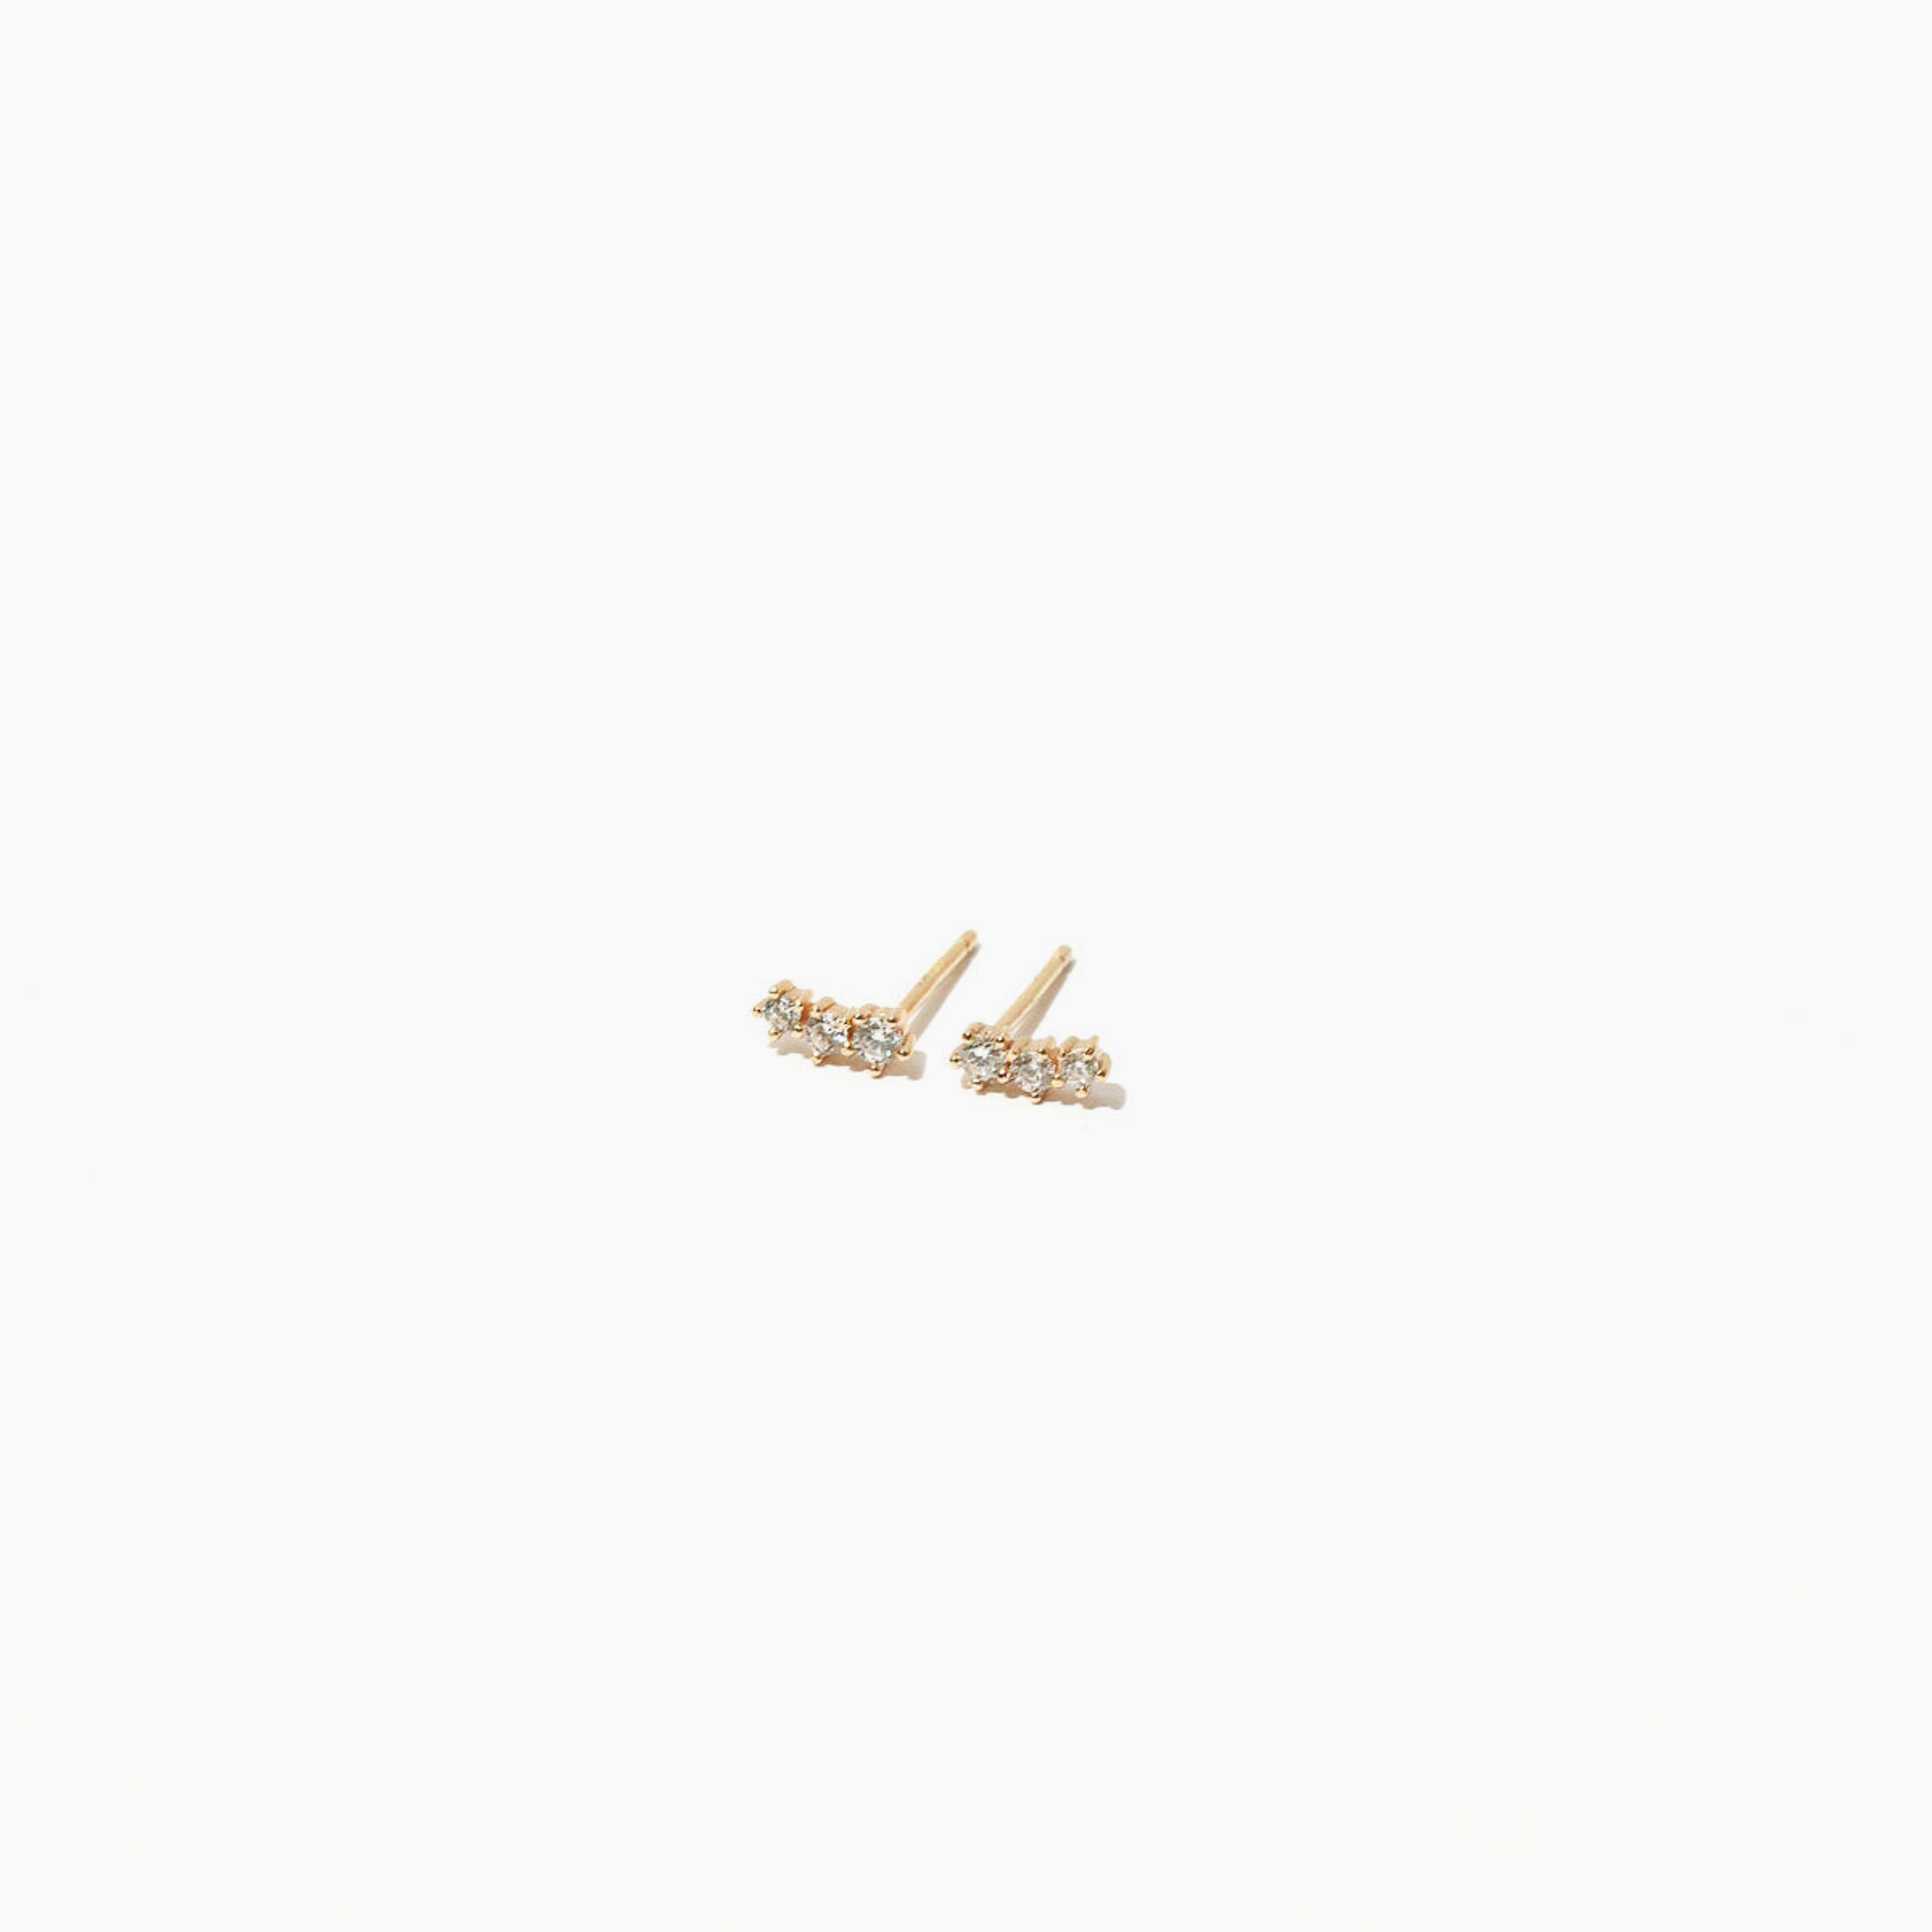 Glimmer Crystal Climber Stud Earrings in Gold